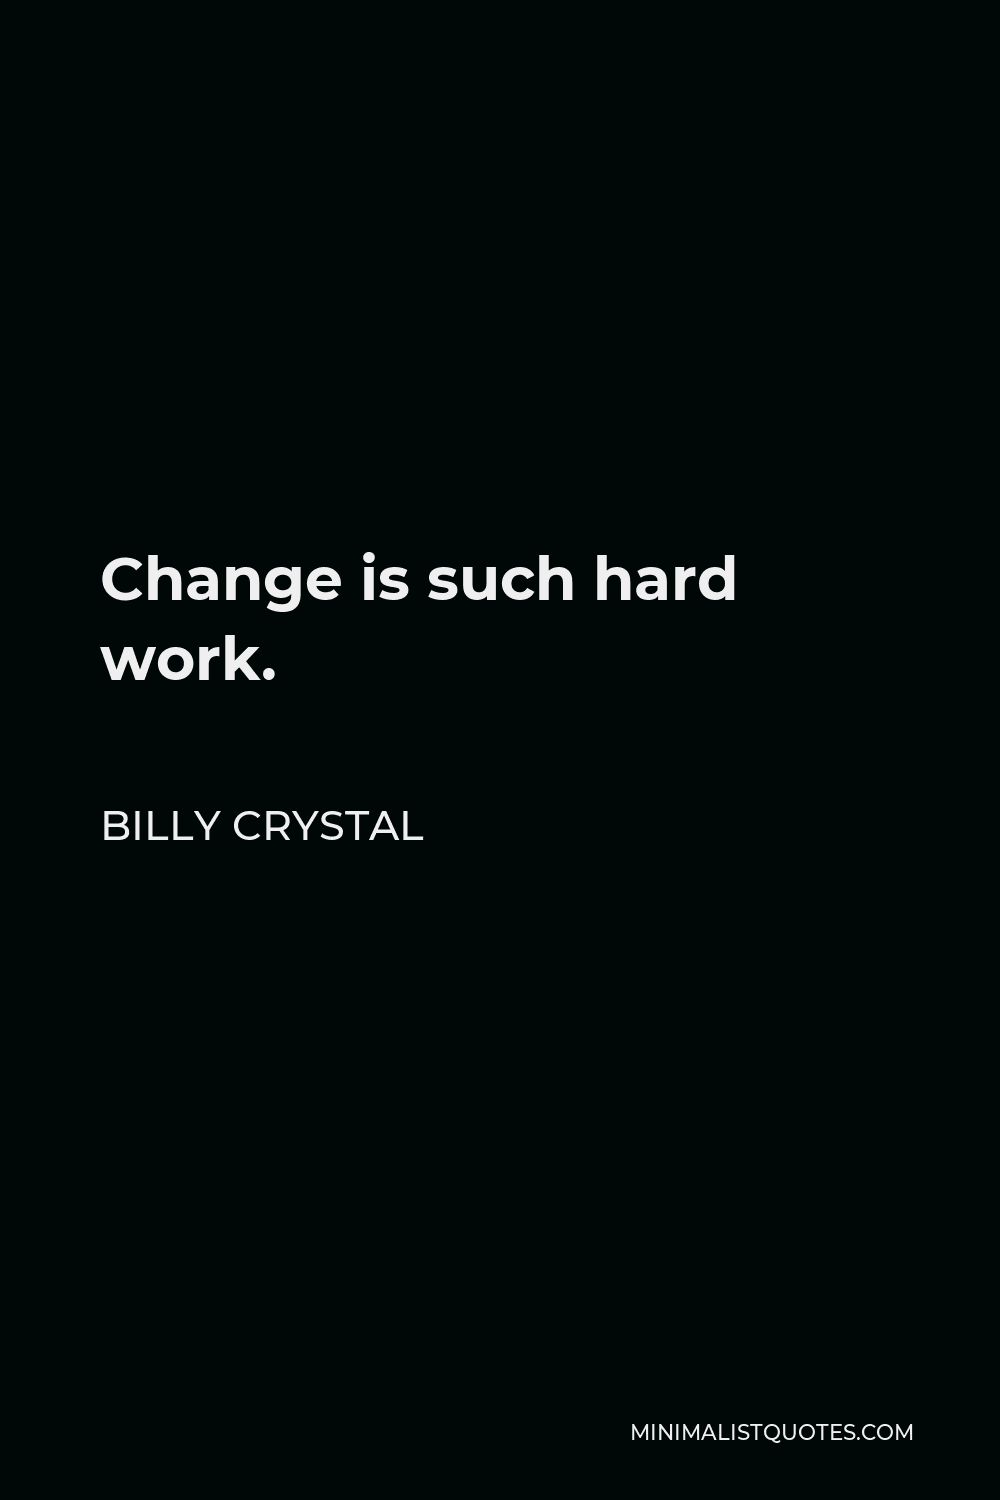 Billy Crystal Quote - Change is such hard work.